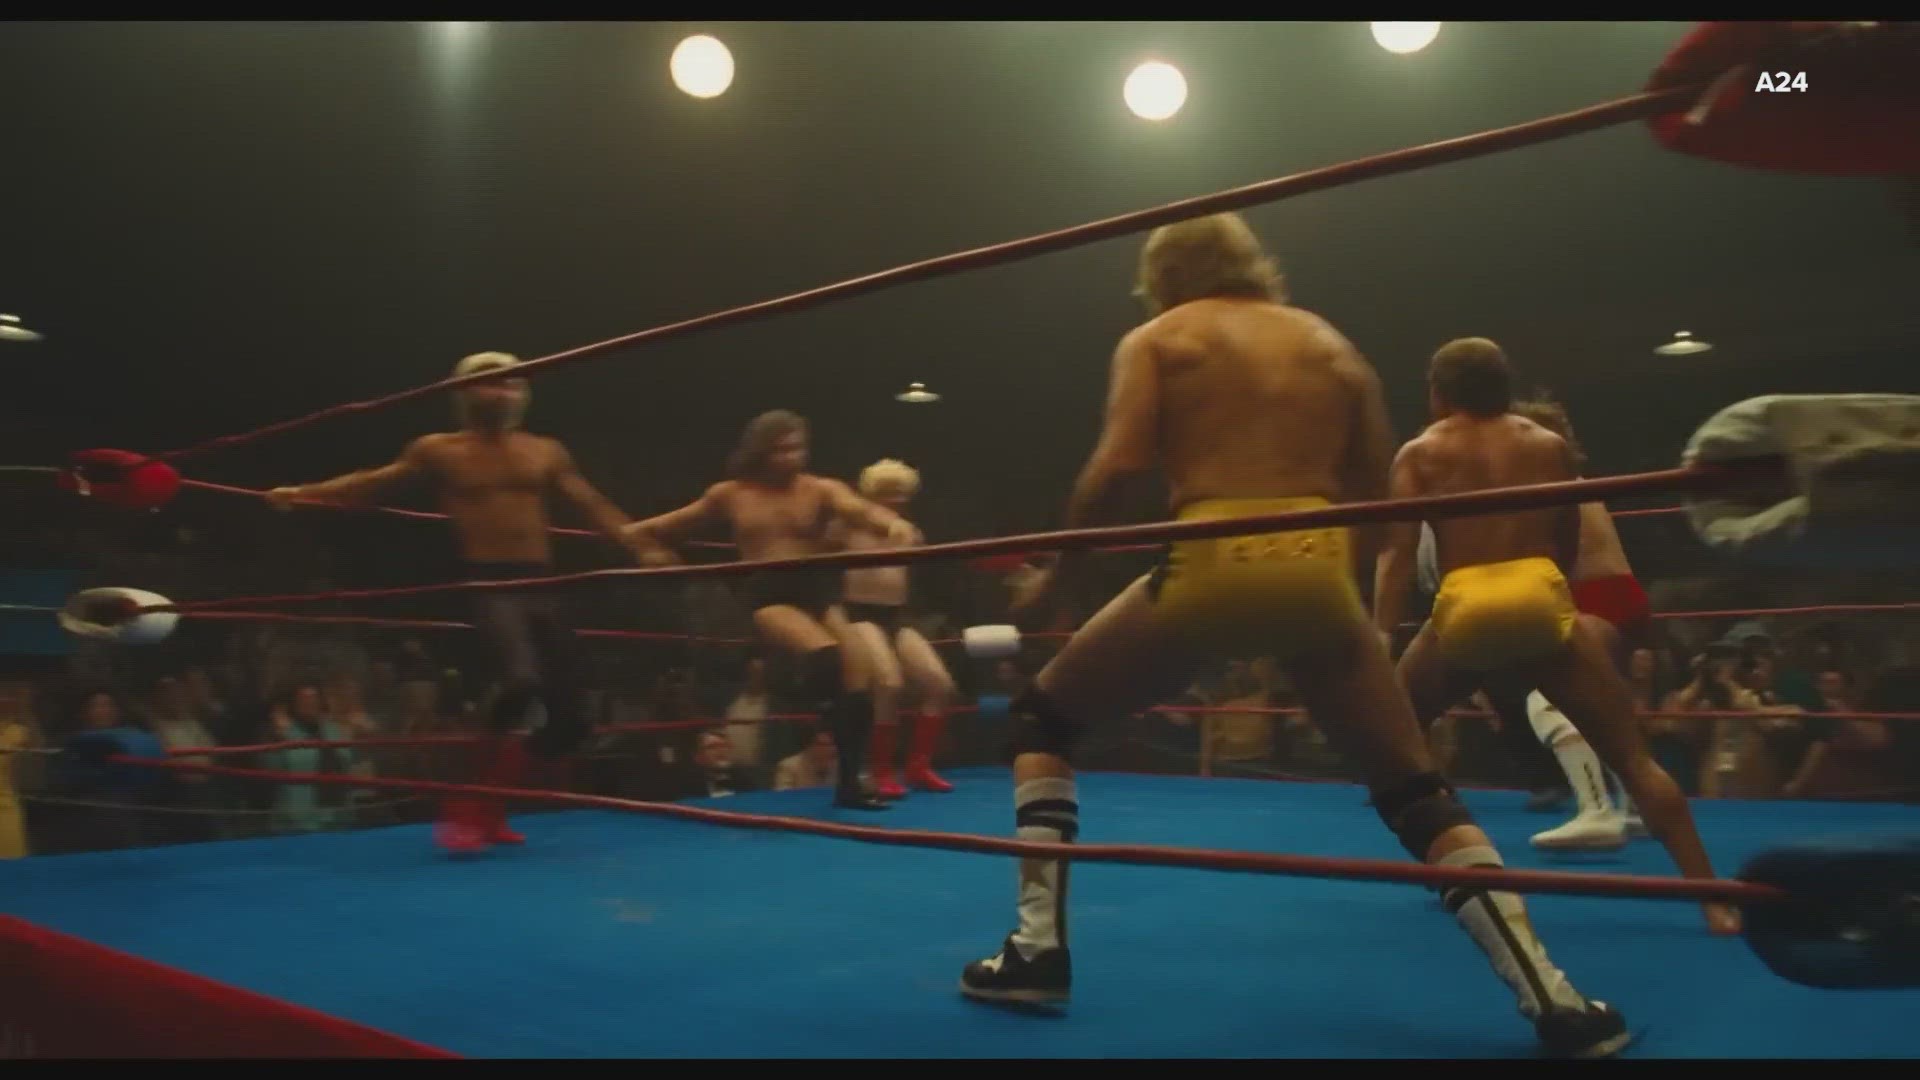 The biopic, put together by A24 Films, focuses on the Von Erichs, their wrestling fame, and the dark side of the ring that only Kevin Von Erich survived.